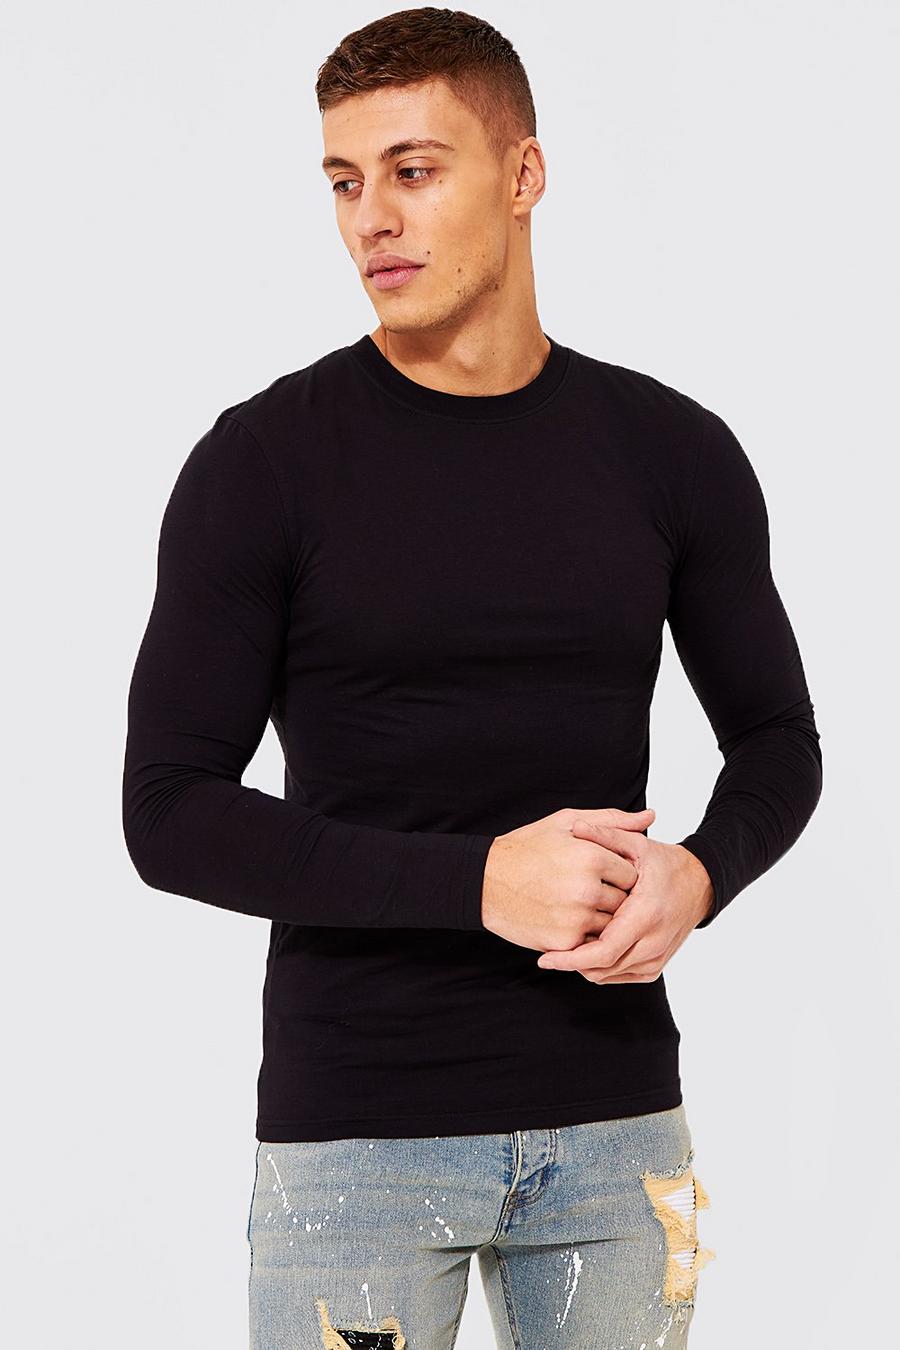 Black Long Sleeve Muscle T-shirt with REEL Cotton